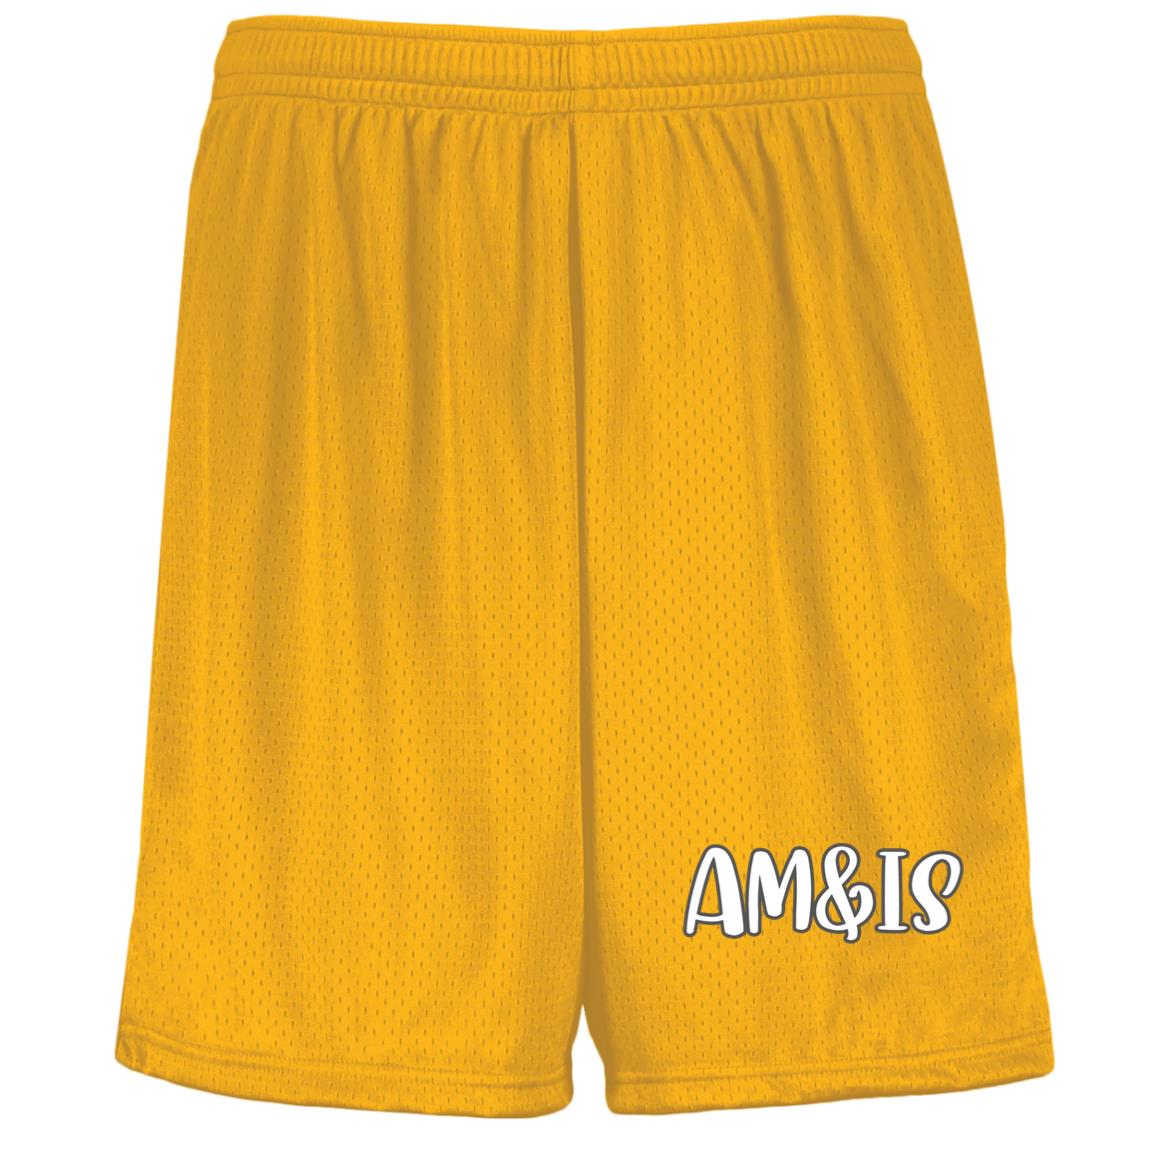 GOLD - AM&IS Activewear Youth Moisture-Wicking Mesh Shorts - kids shorts at TFC&H Co.